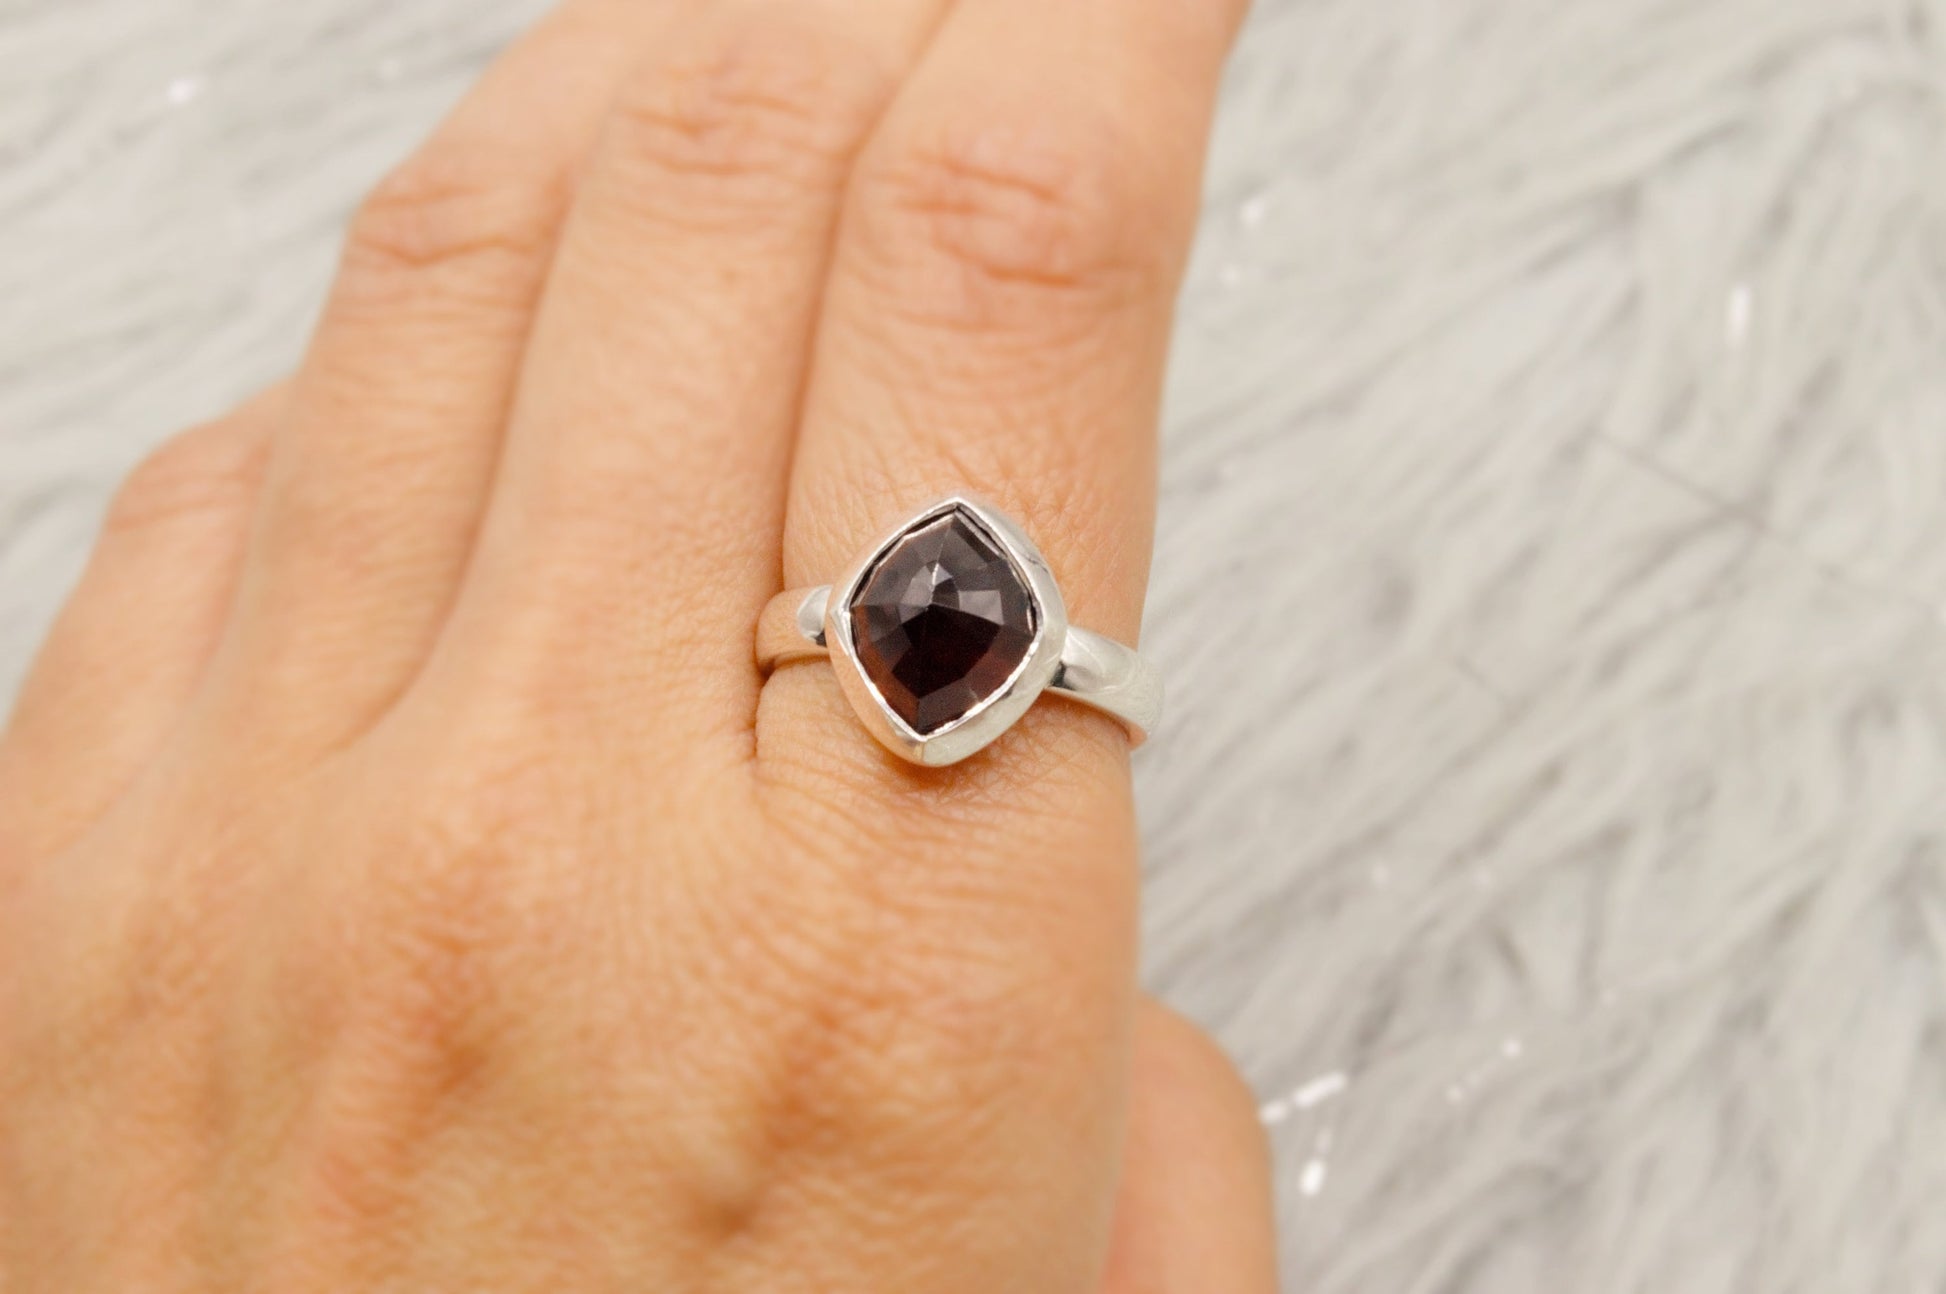 Garnet Ring Sterling Silver, UK Size N, Garnet Jewelry, Dainty Red Gemstone Ring, Stacking Ring, January Birthstone, Birthday Gifts For Her